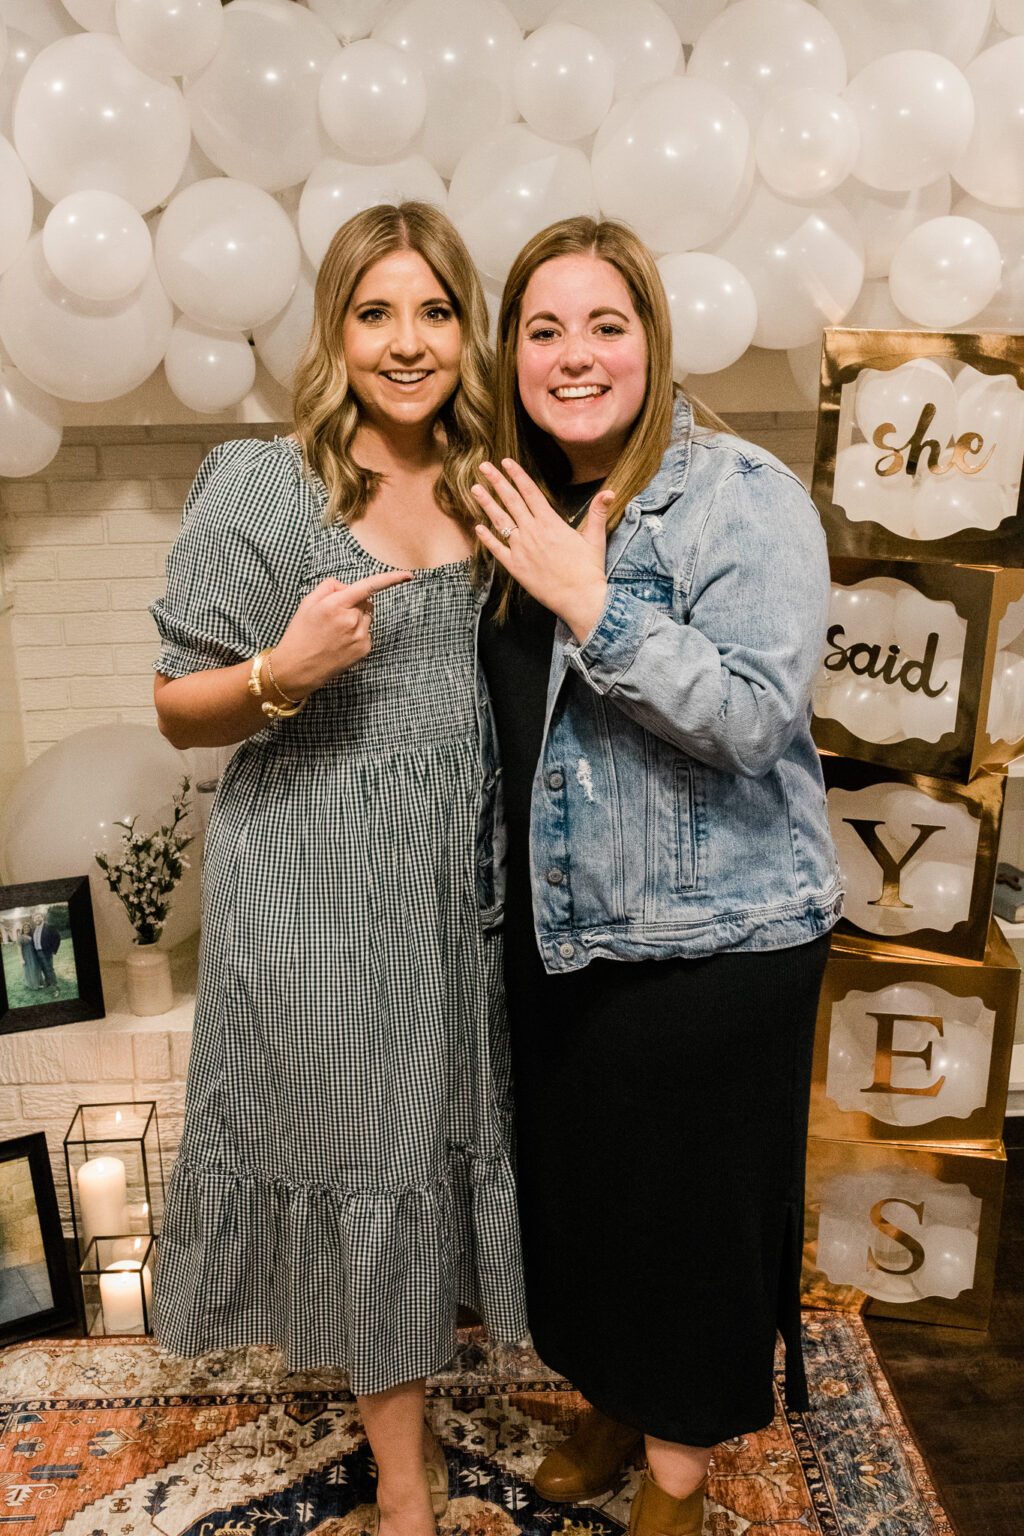 How to Throw a Proposal Party - Thrifty Pineapple